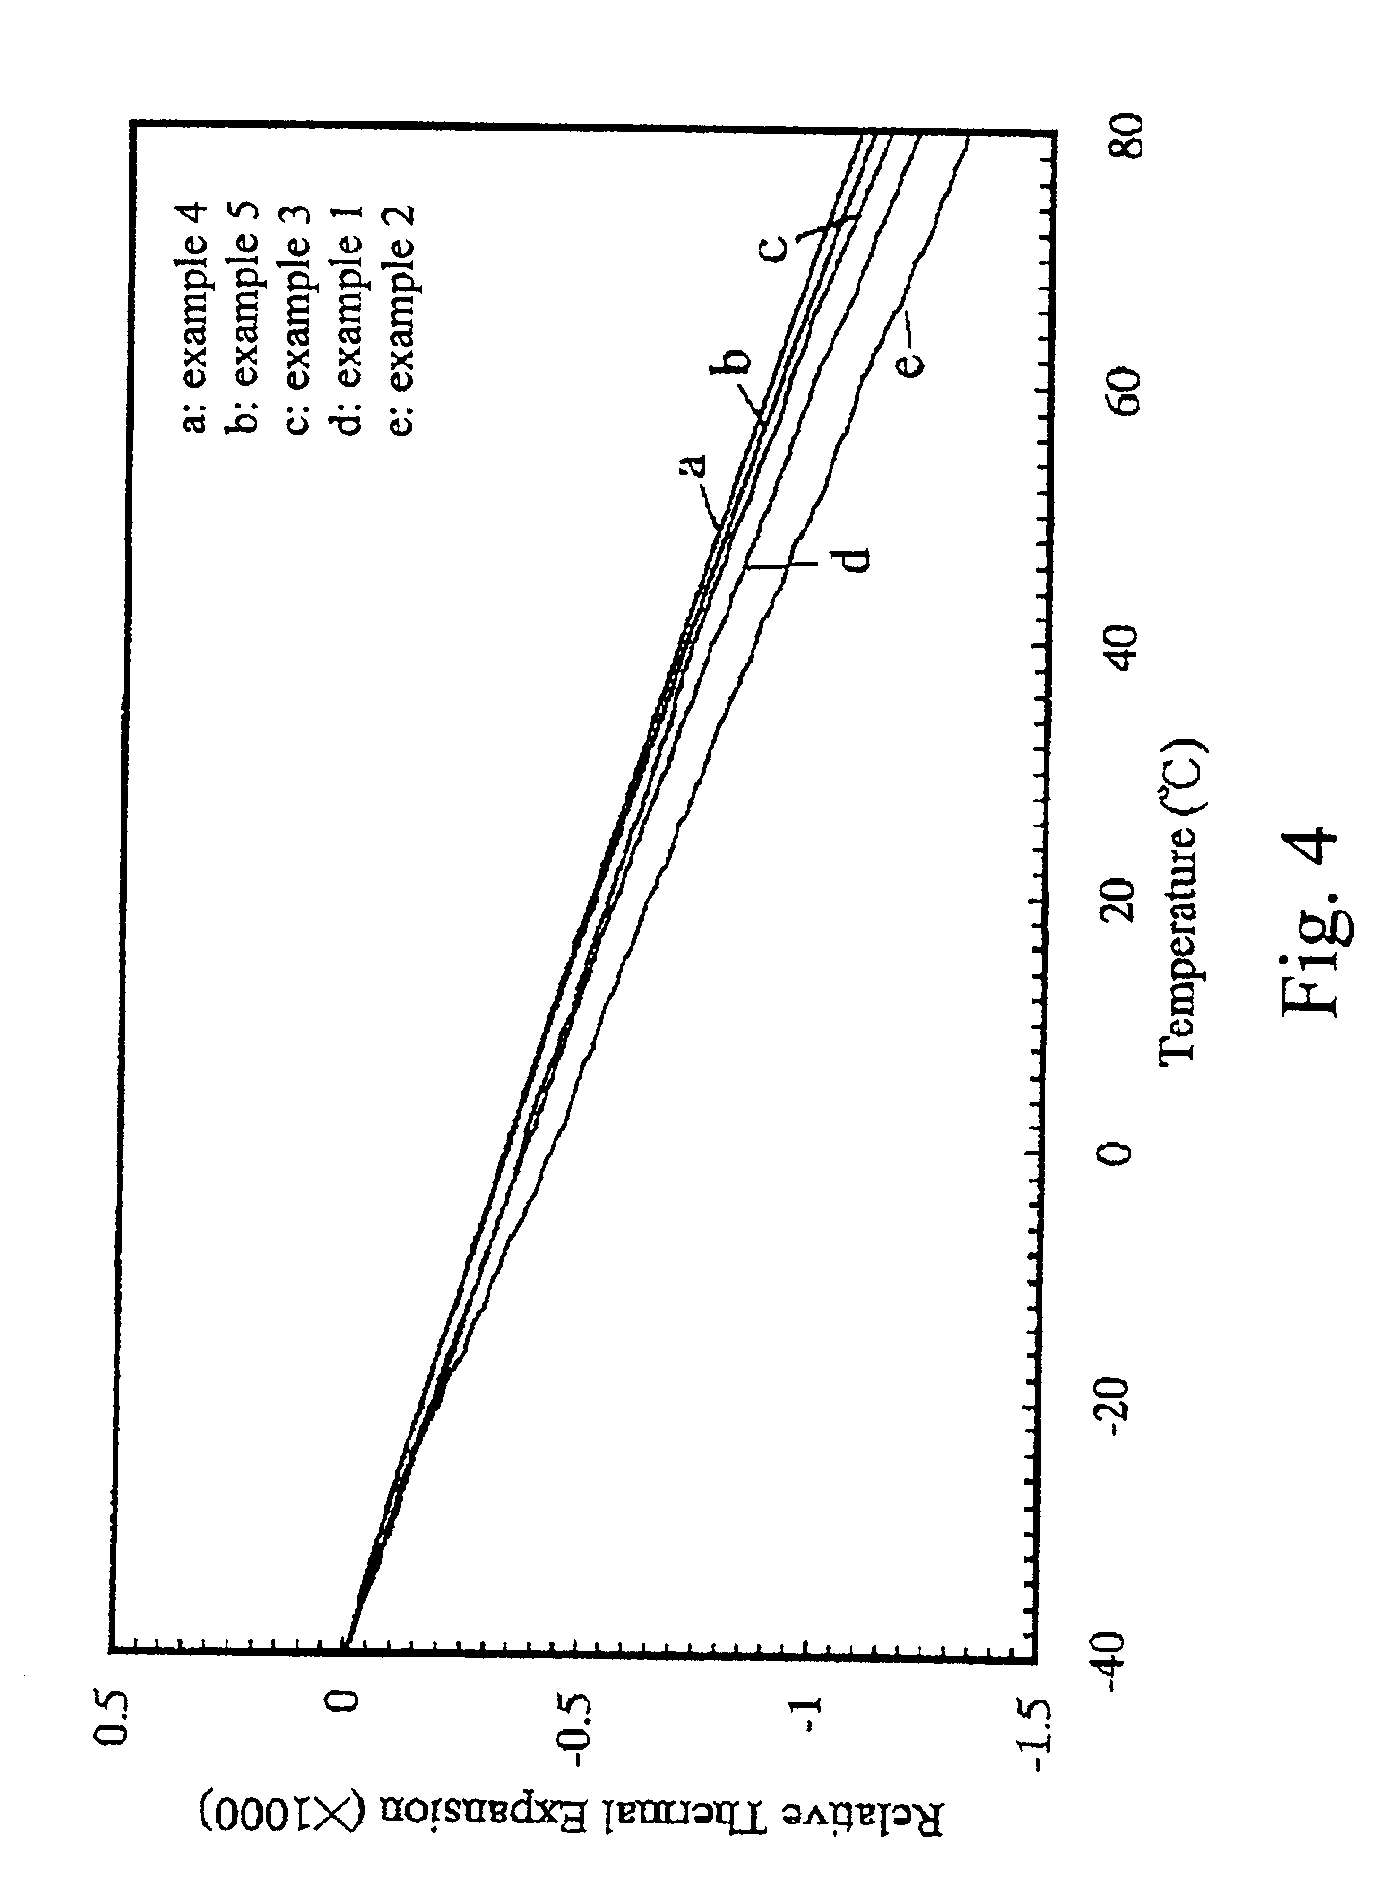 Process for preparation of zirconium tungstate ceramic body, zirconium tungstate ceramic body prepared thereby, and temperature compensated fiber bragg grating device